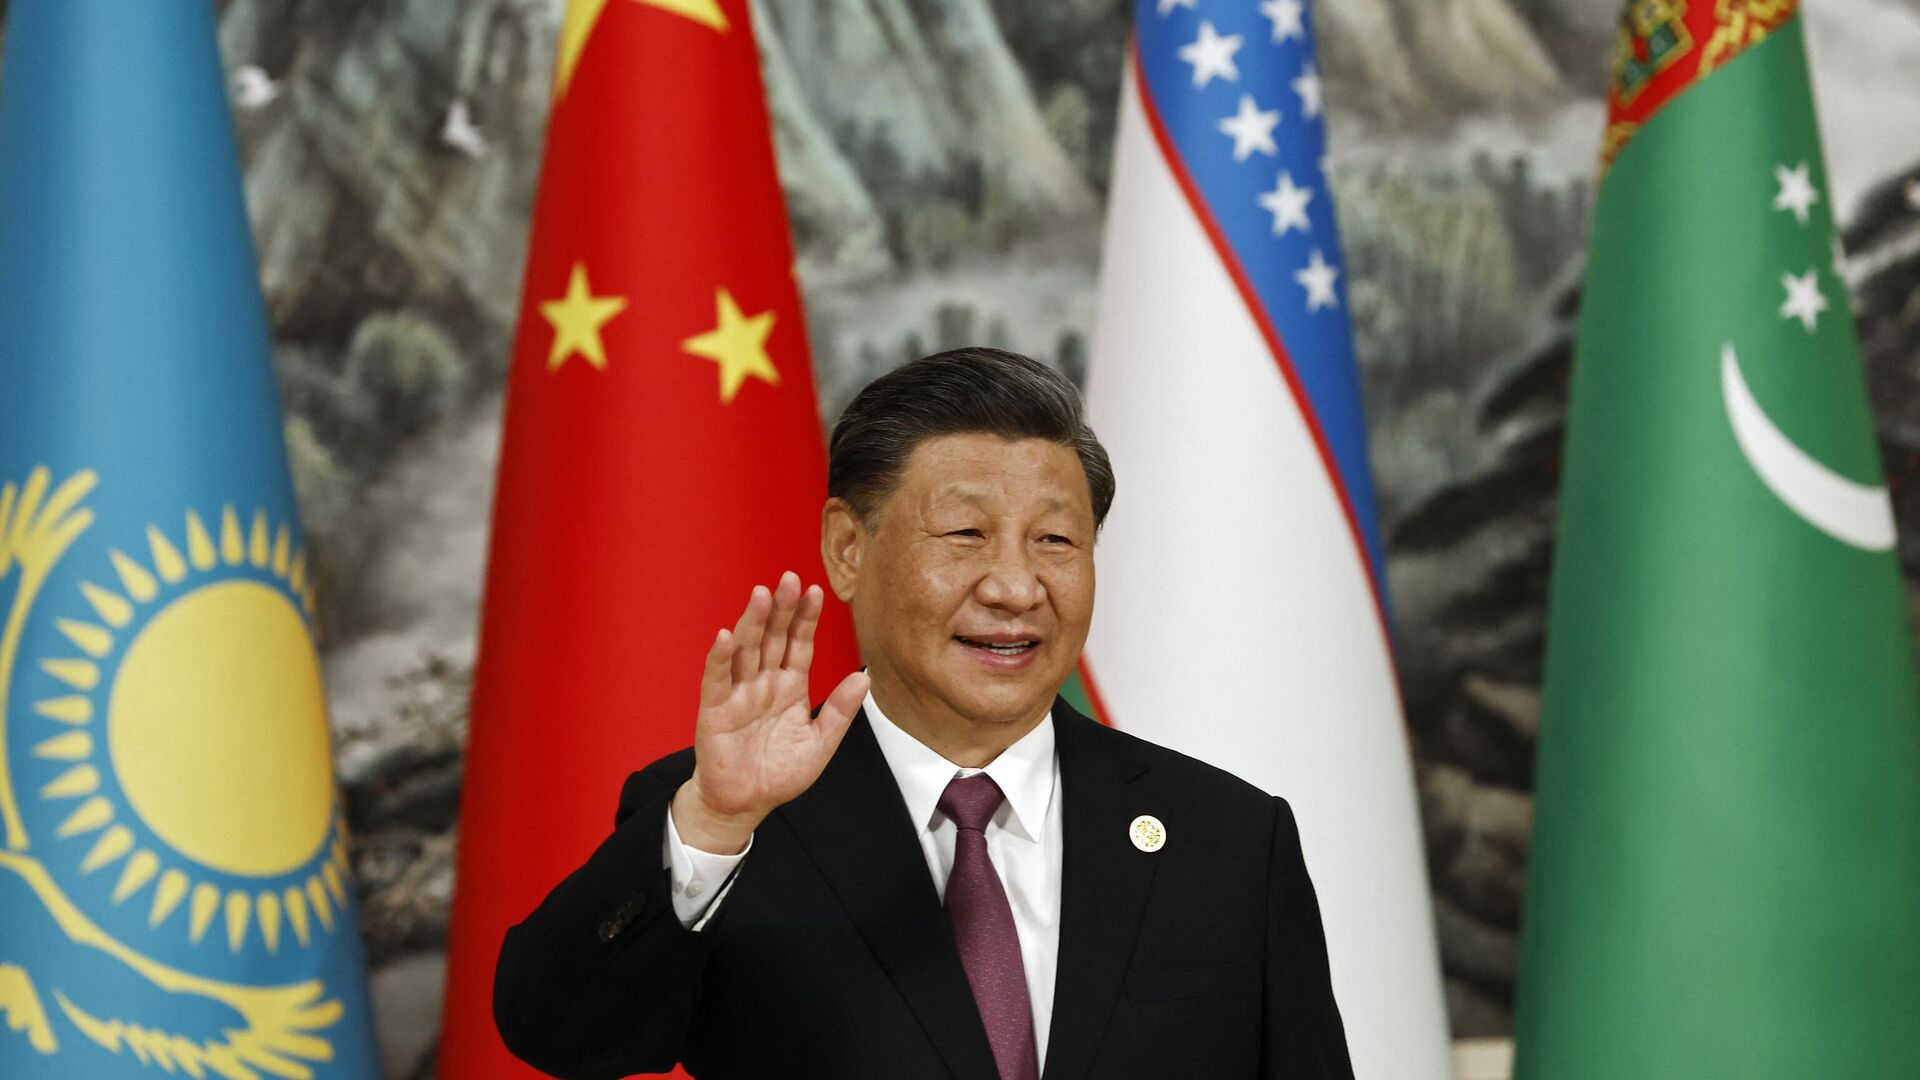 Chinese President Xi Jinping waves during a group photo session during the China-Central Asia Summit in Xian, in China's northern Shaanxi province on May 19, 2023 - Sputnik International, 1920, 19.05.2023